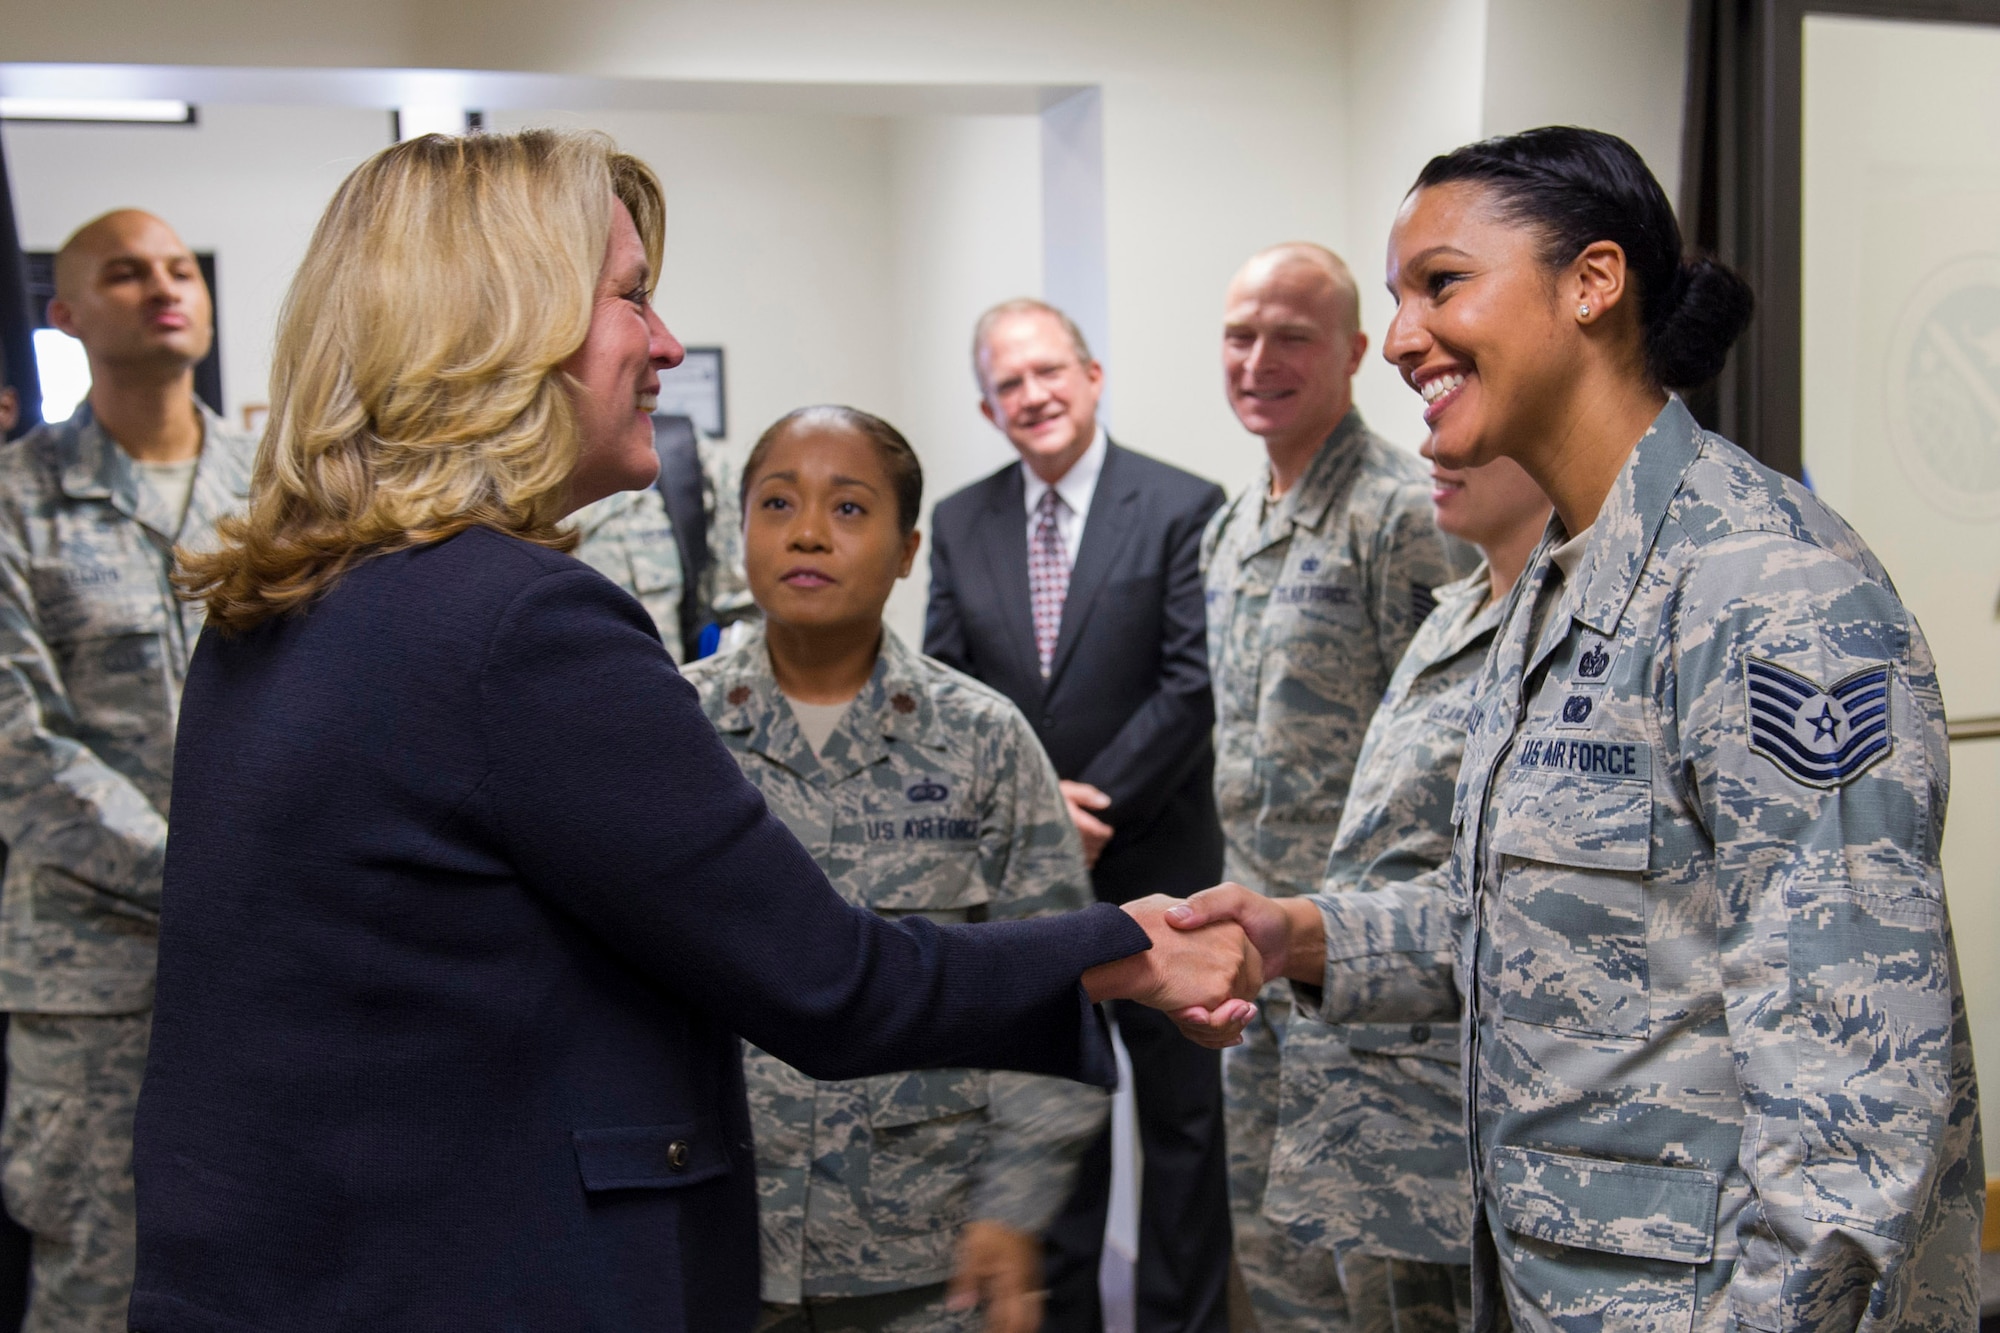 The Secretary of the Air Force Deborah Lee James shakes hands with Tech. Sgt. Tamara Acfalle, 45th Force Support Squadron Airman Leadership School instructor Sept. 9, 2016, at Patrick Air Force Base Fla. The meeting was a chance for Airmen to speak directly with the secretary about Air Force topics and their role in space operations. (U.S. Air Force photo/Matthew Jurgens)